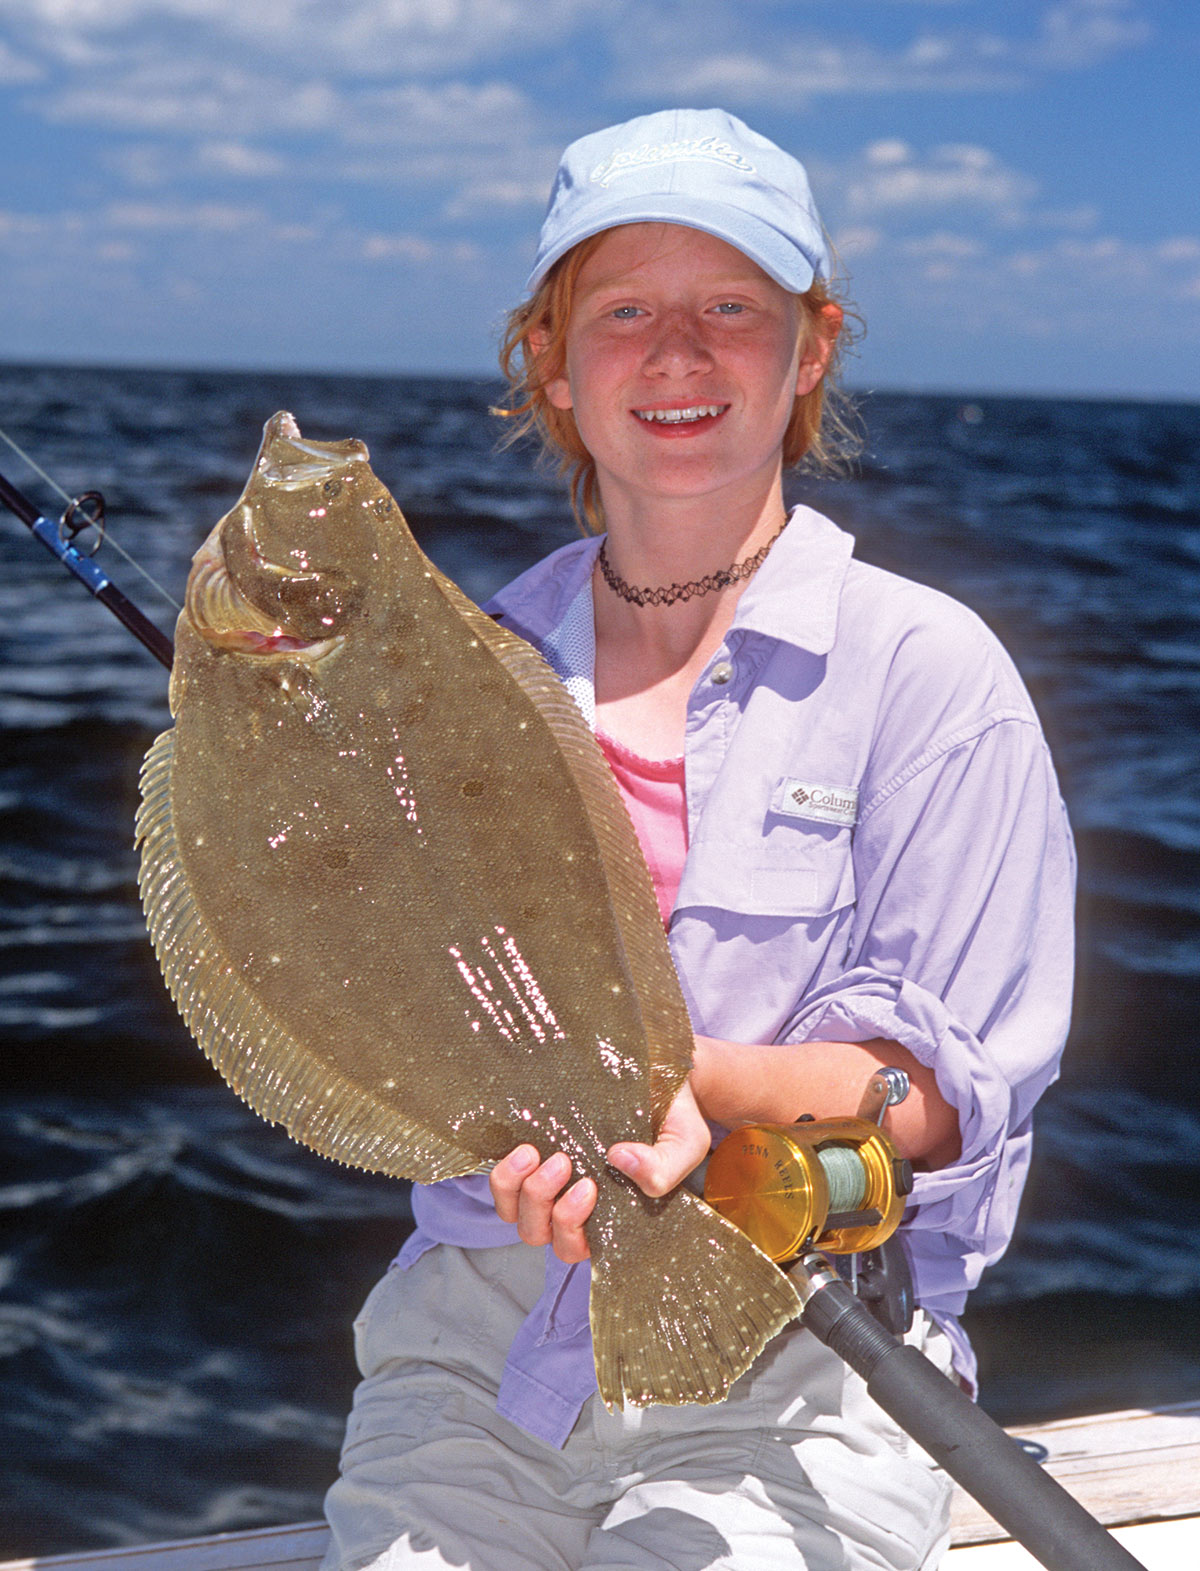 Girl on a boat showing off the fluke fish she caught